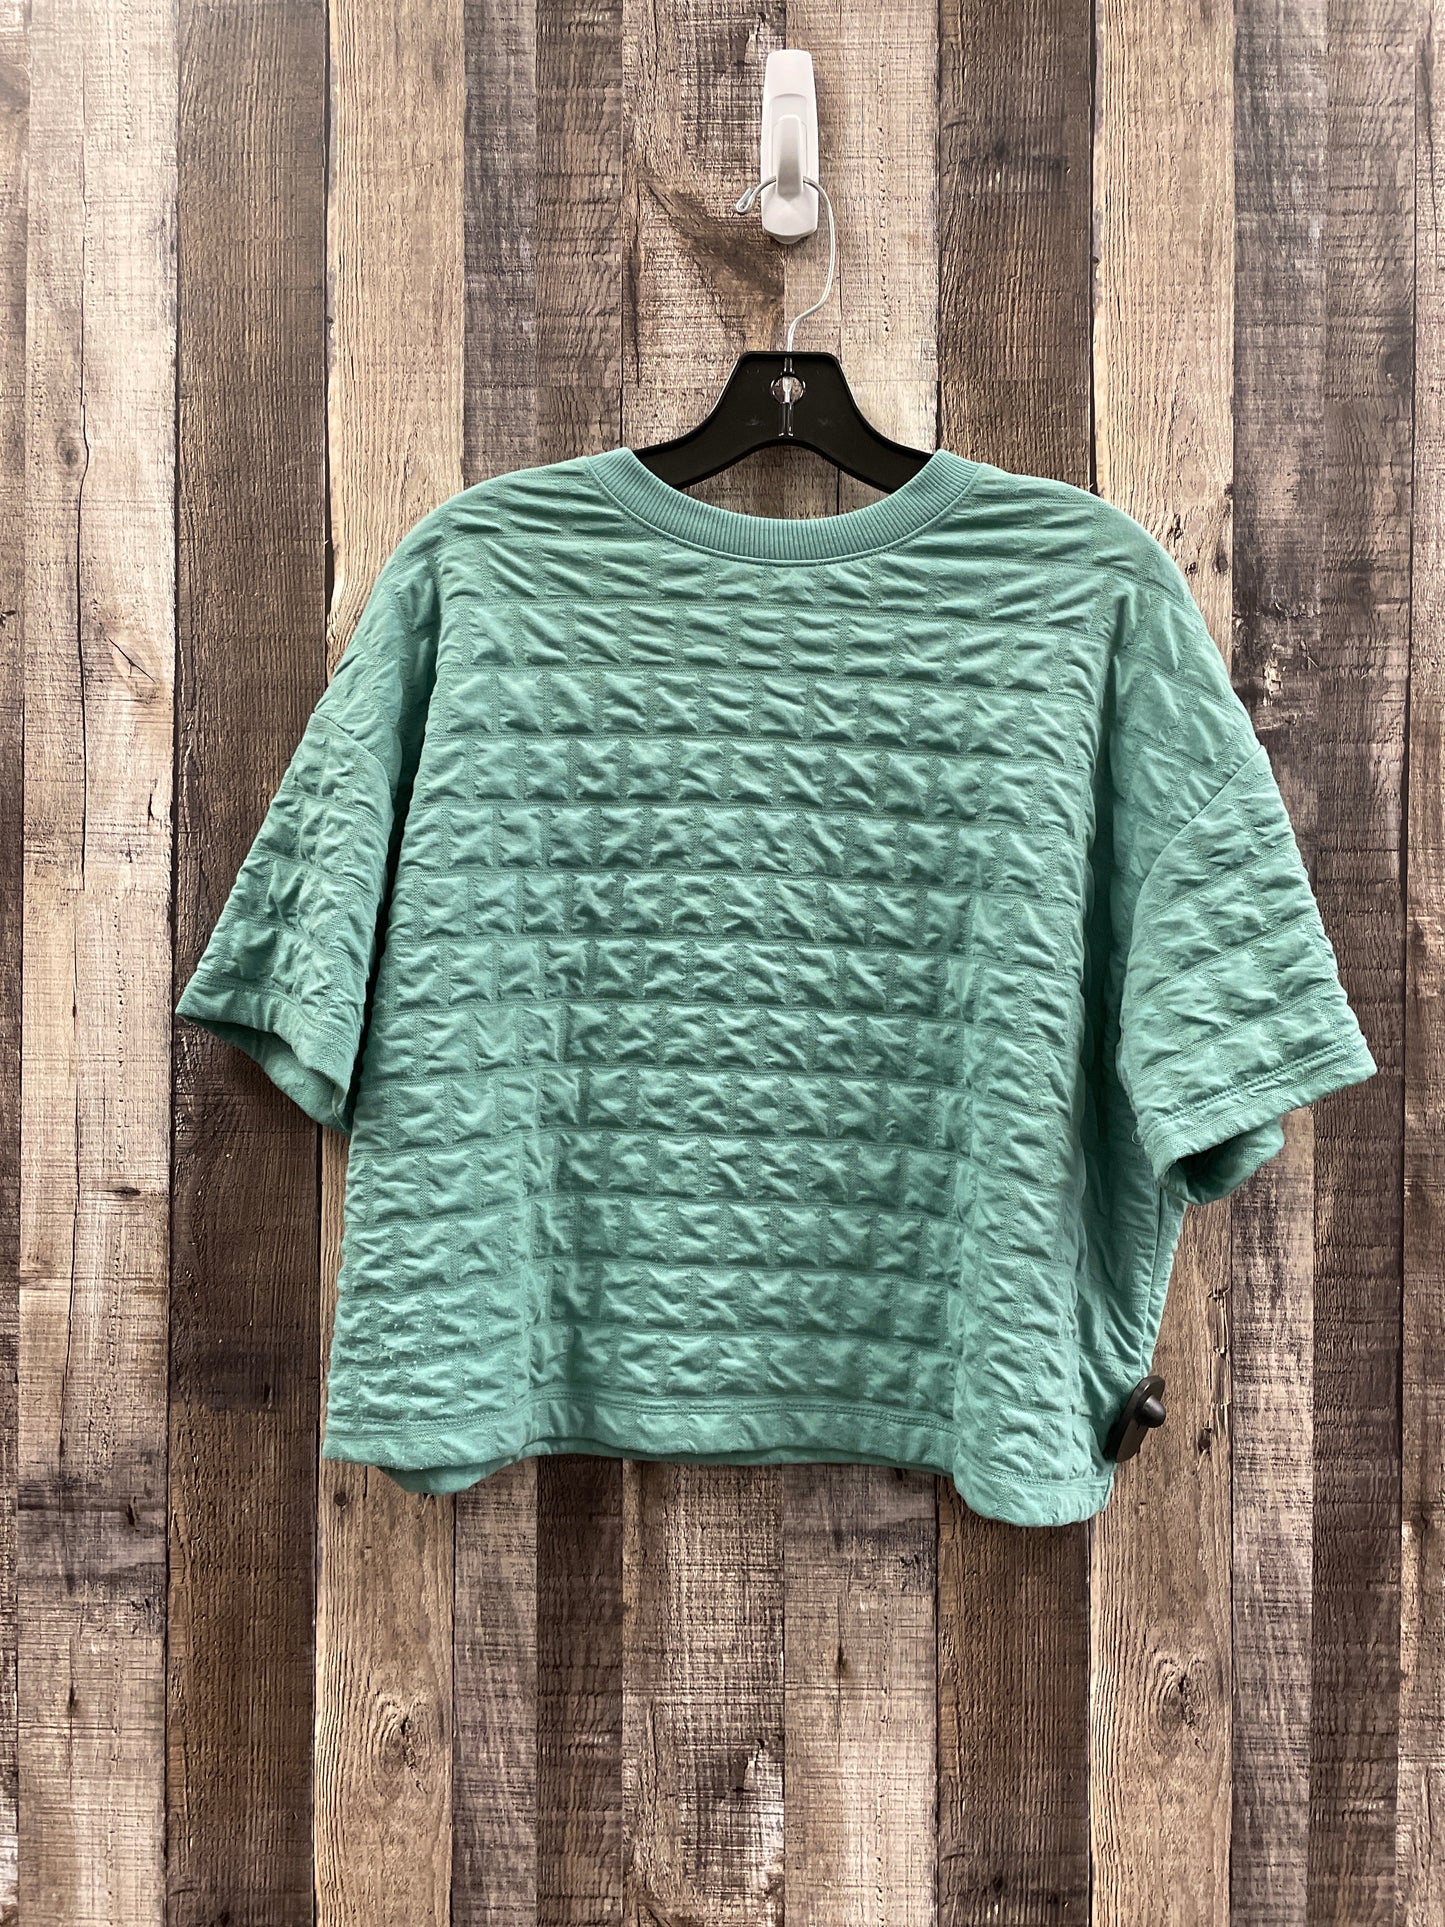 Green Top Short Sleeve A New Day, Size M